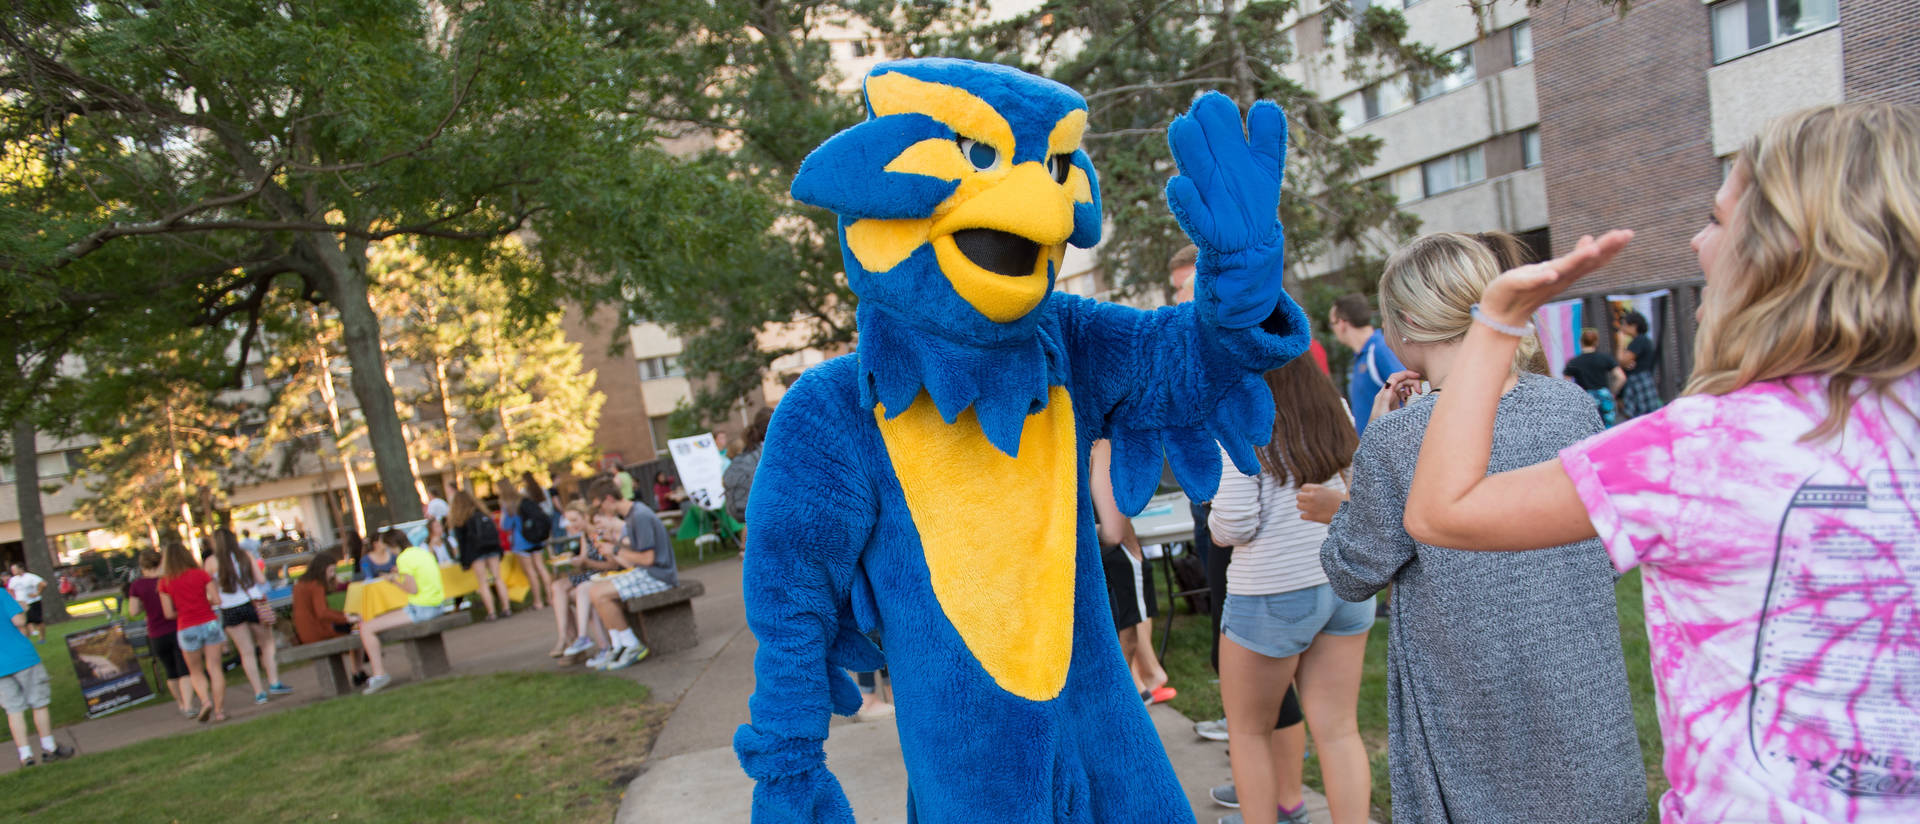 UWEC Mascot Blu high-fiving students at cookout